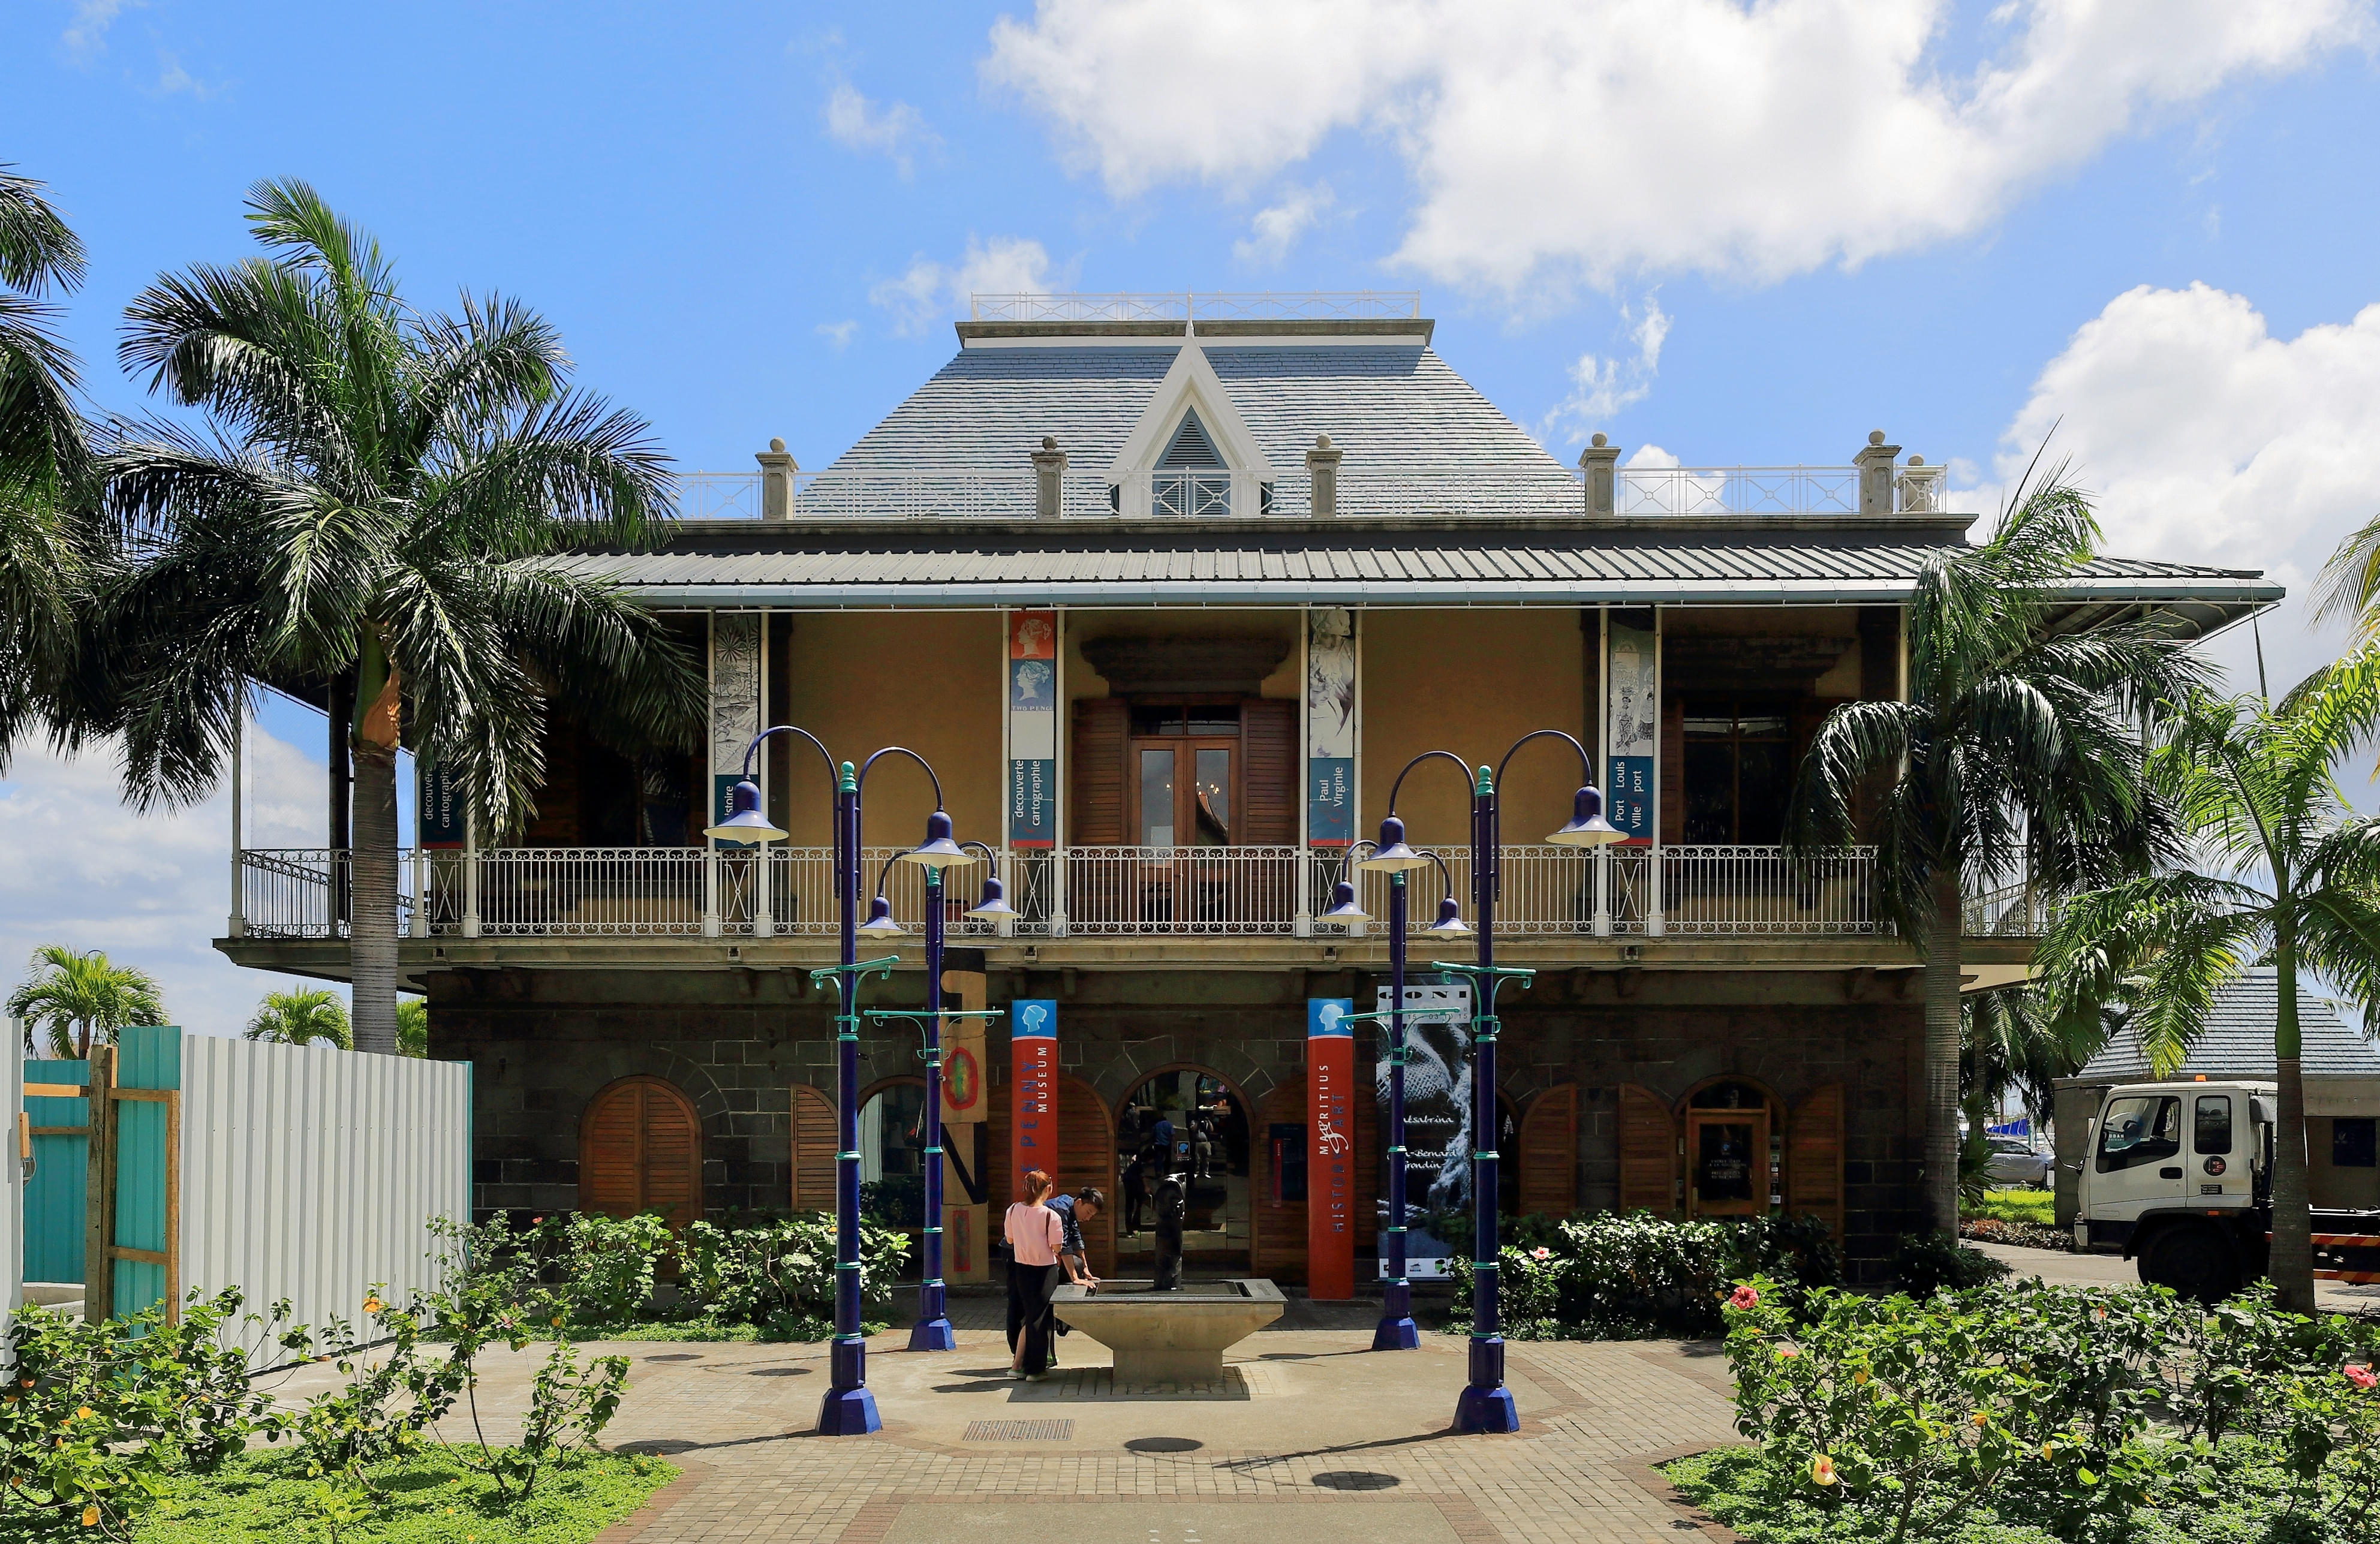 The Blue Penny Museum